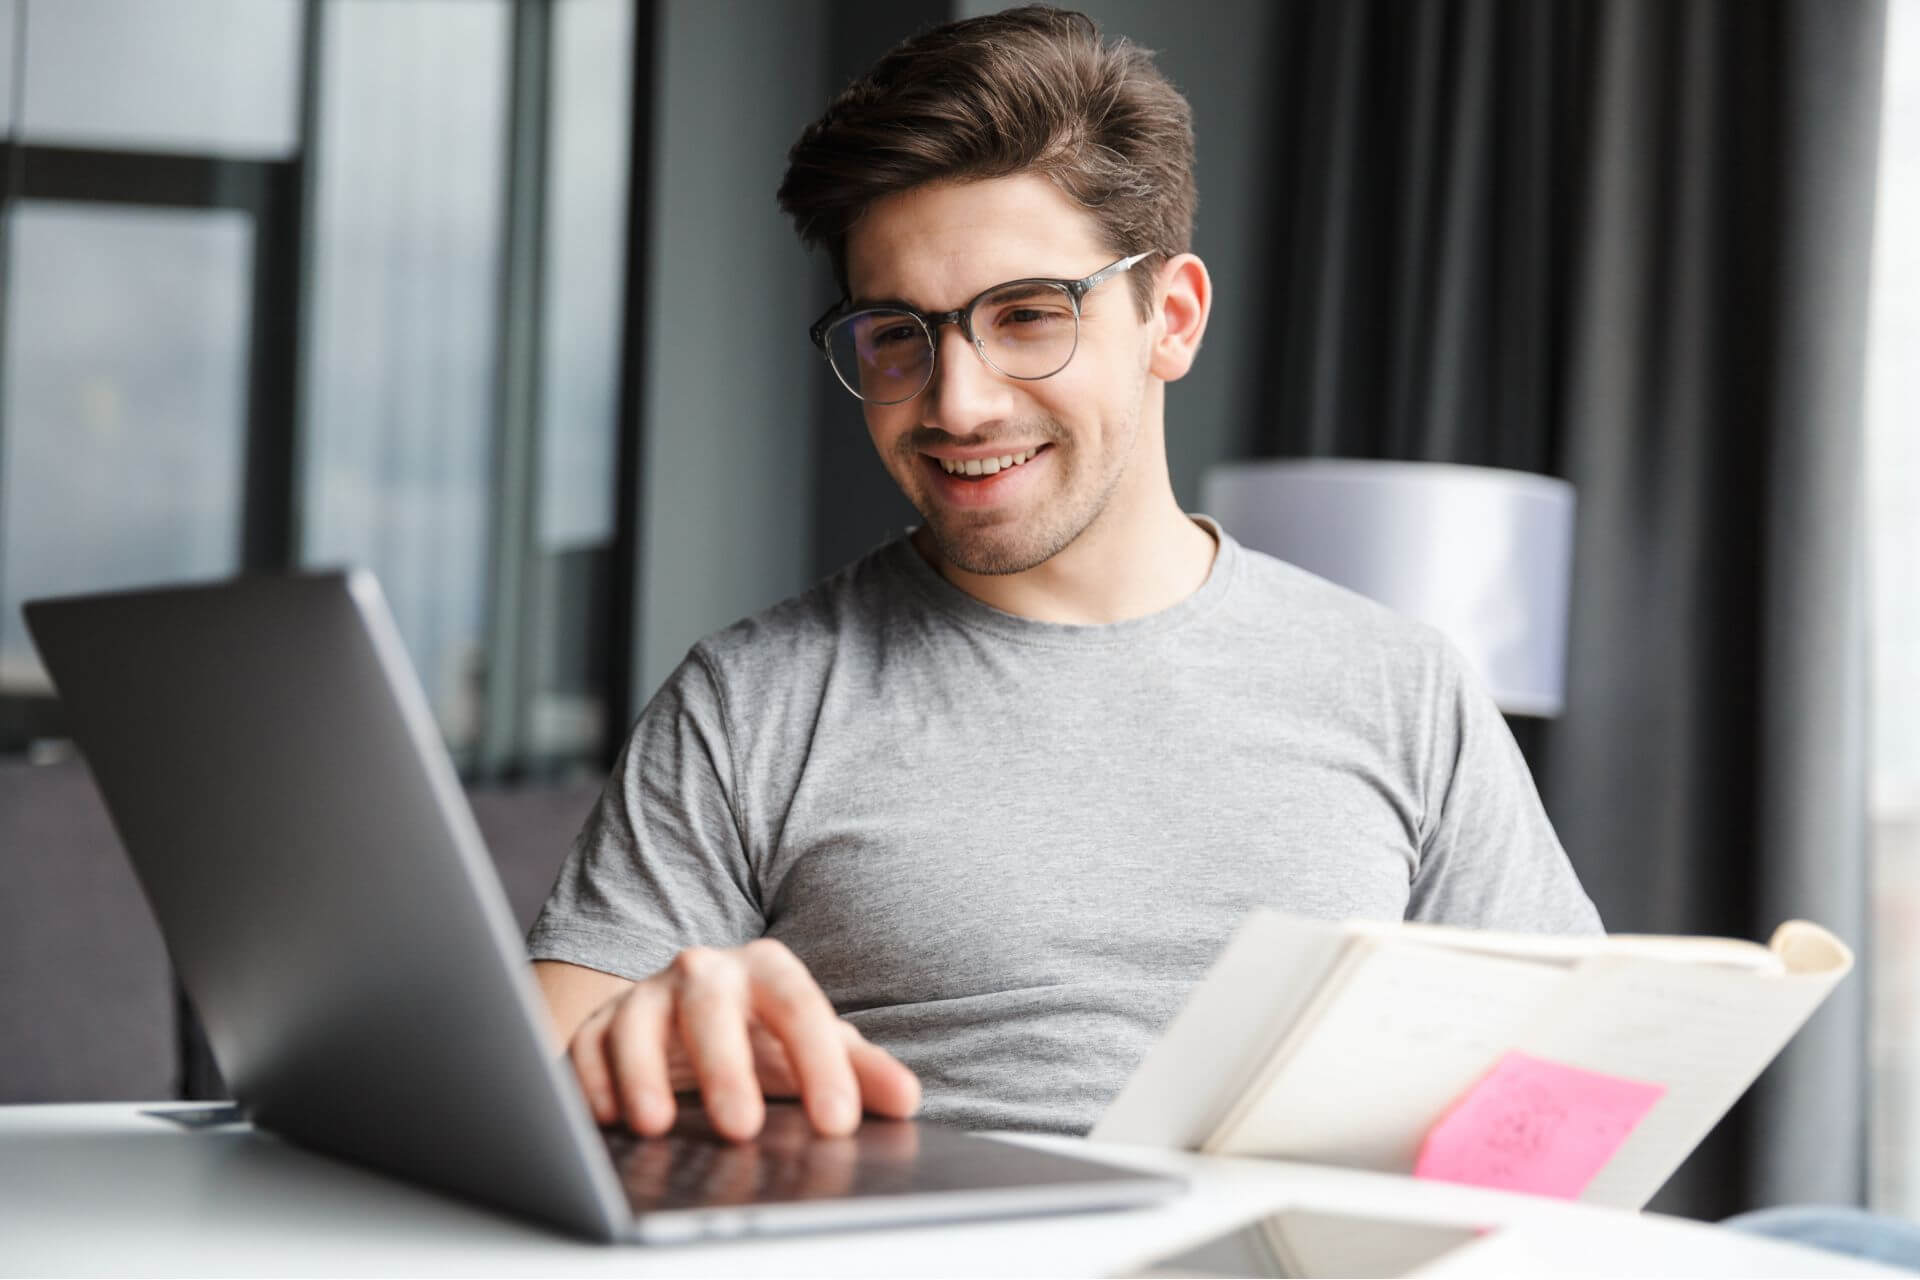 A man in glasses working on a laptop, engrossed in his tasks.